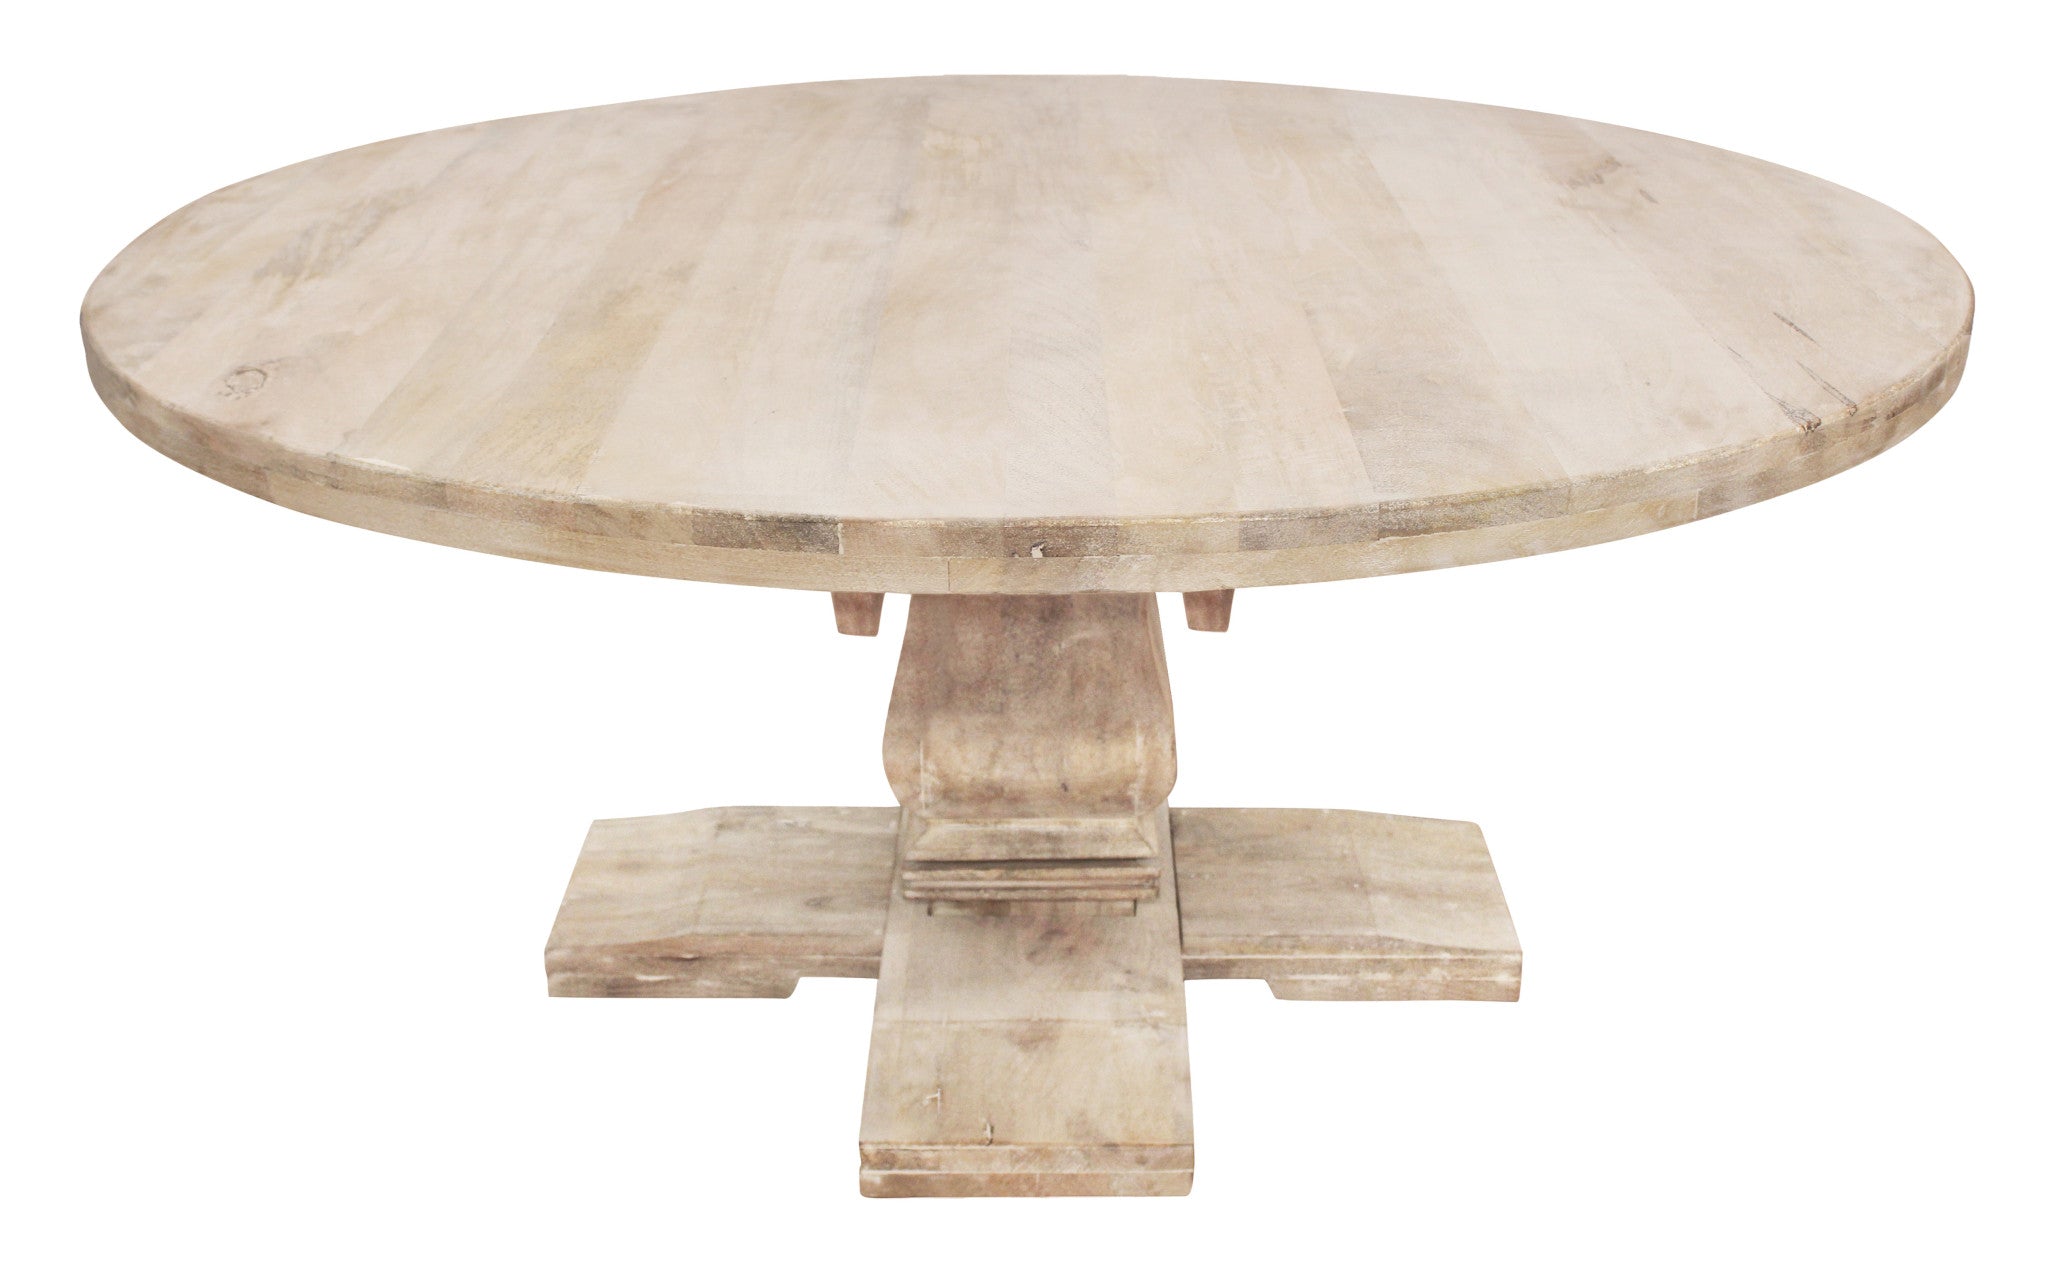 70" Light Brown Rounded Solid Wood Dining Table